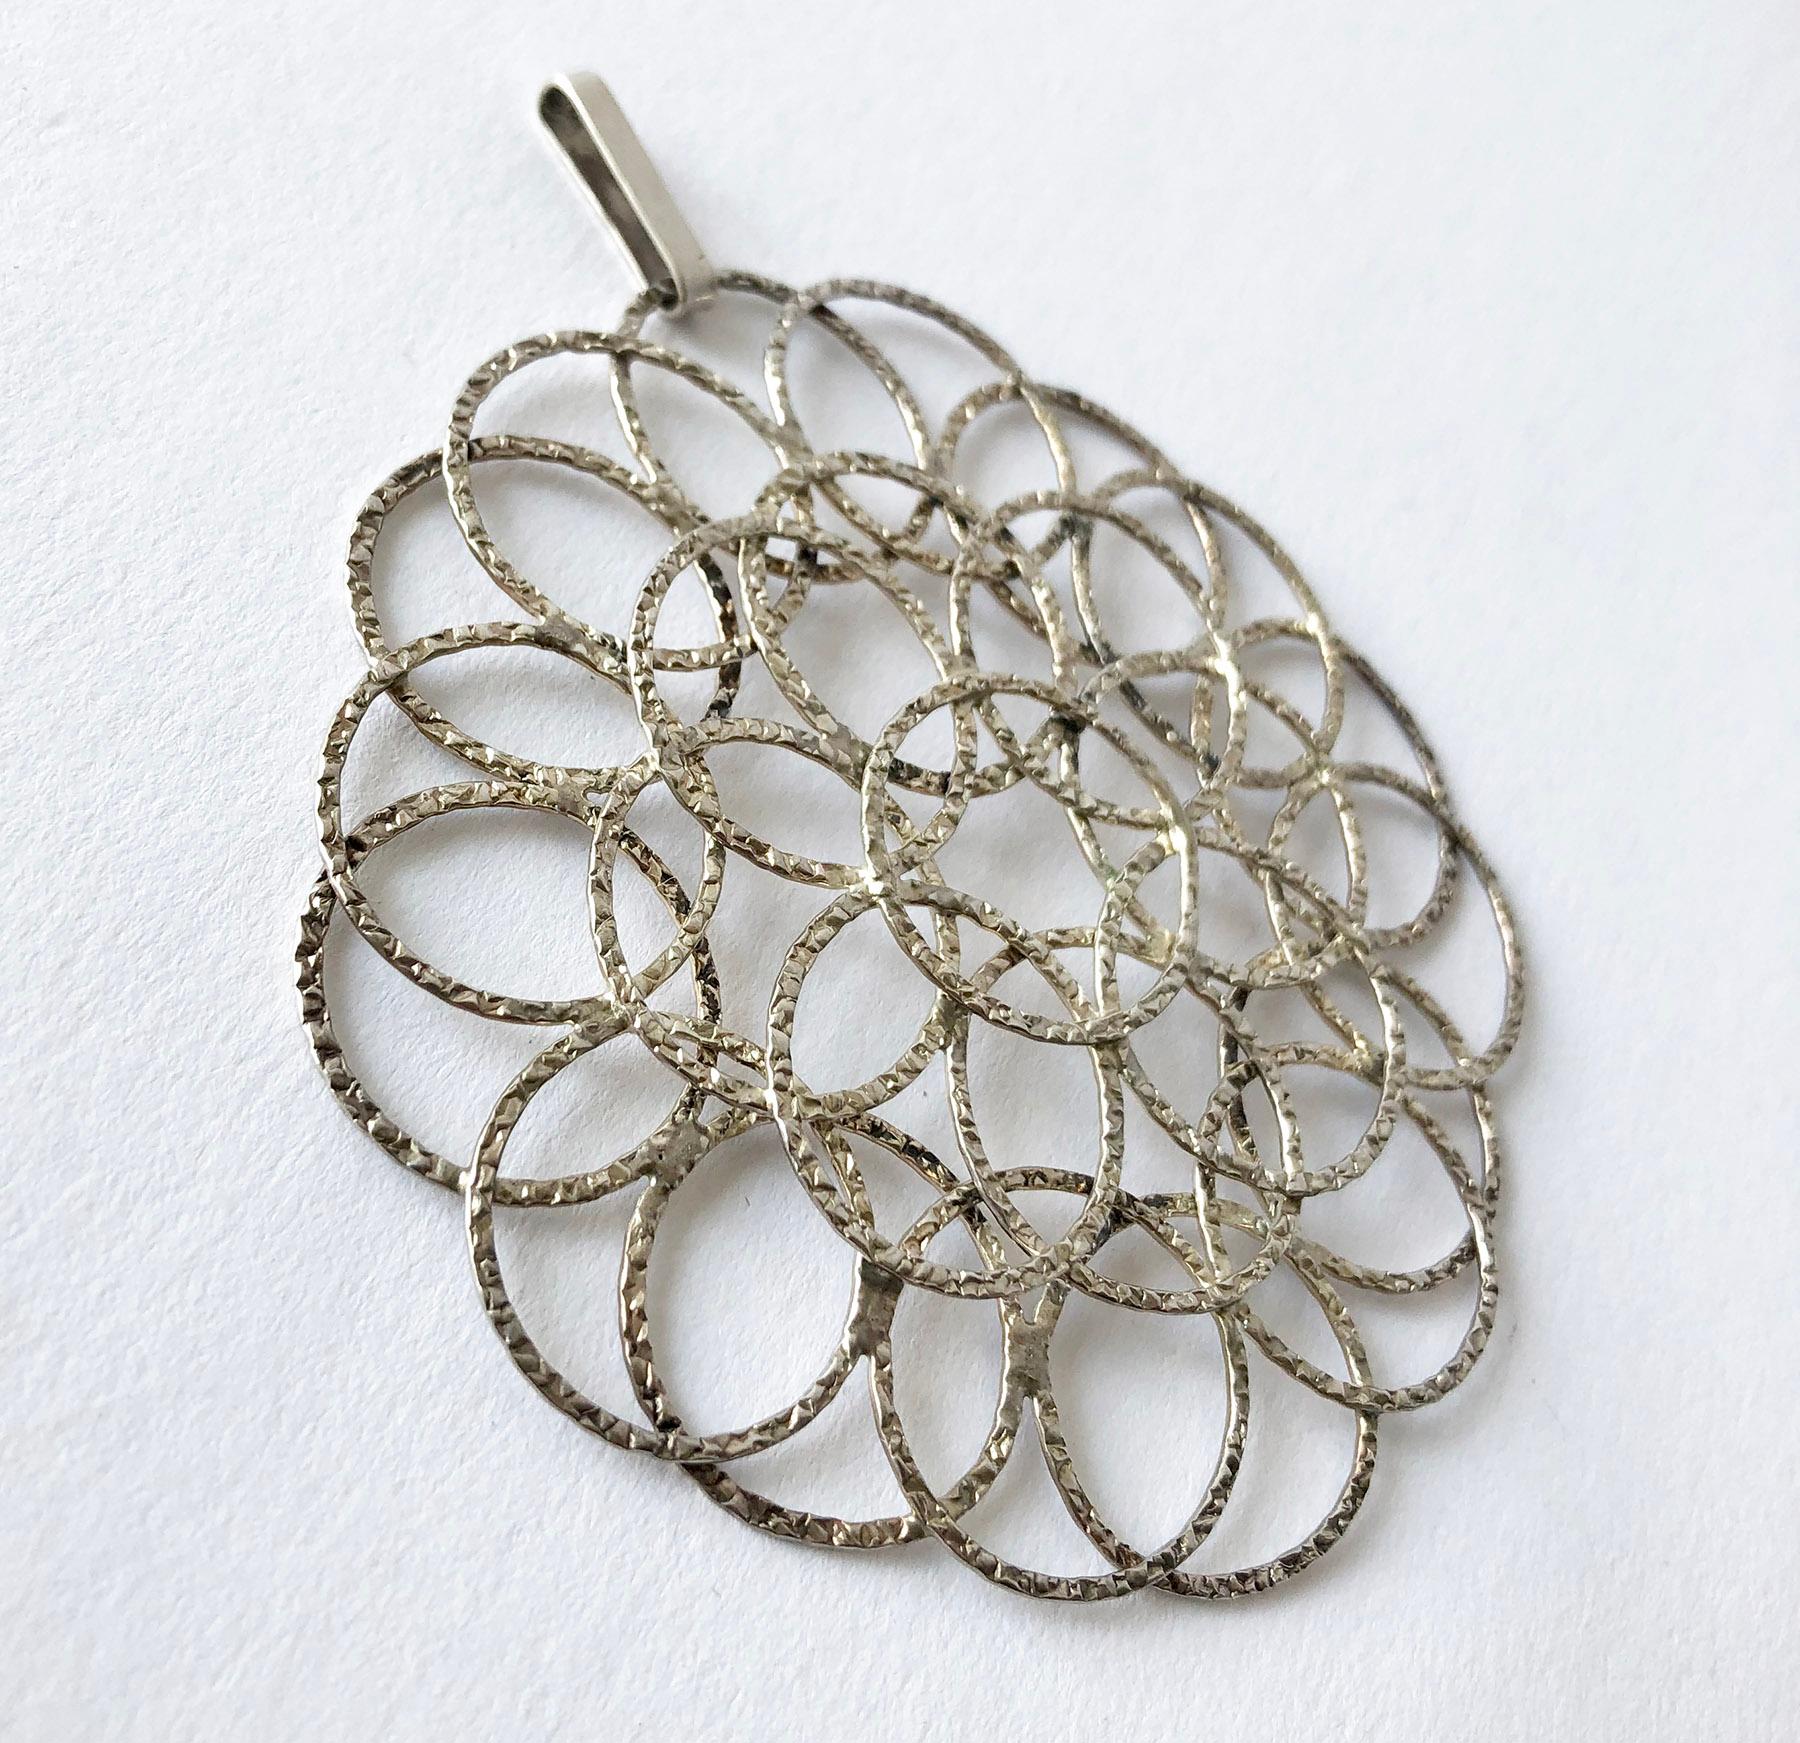 Sterling silver circular lacy pendant created by Victor Janson of Sweden, circa 1970's. Pendant measures 3